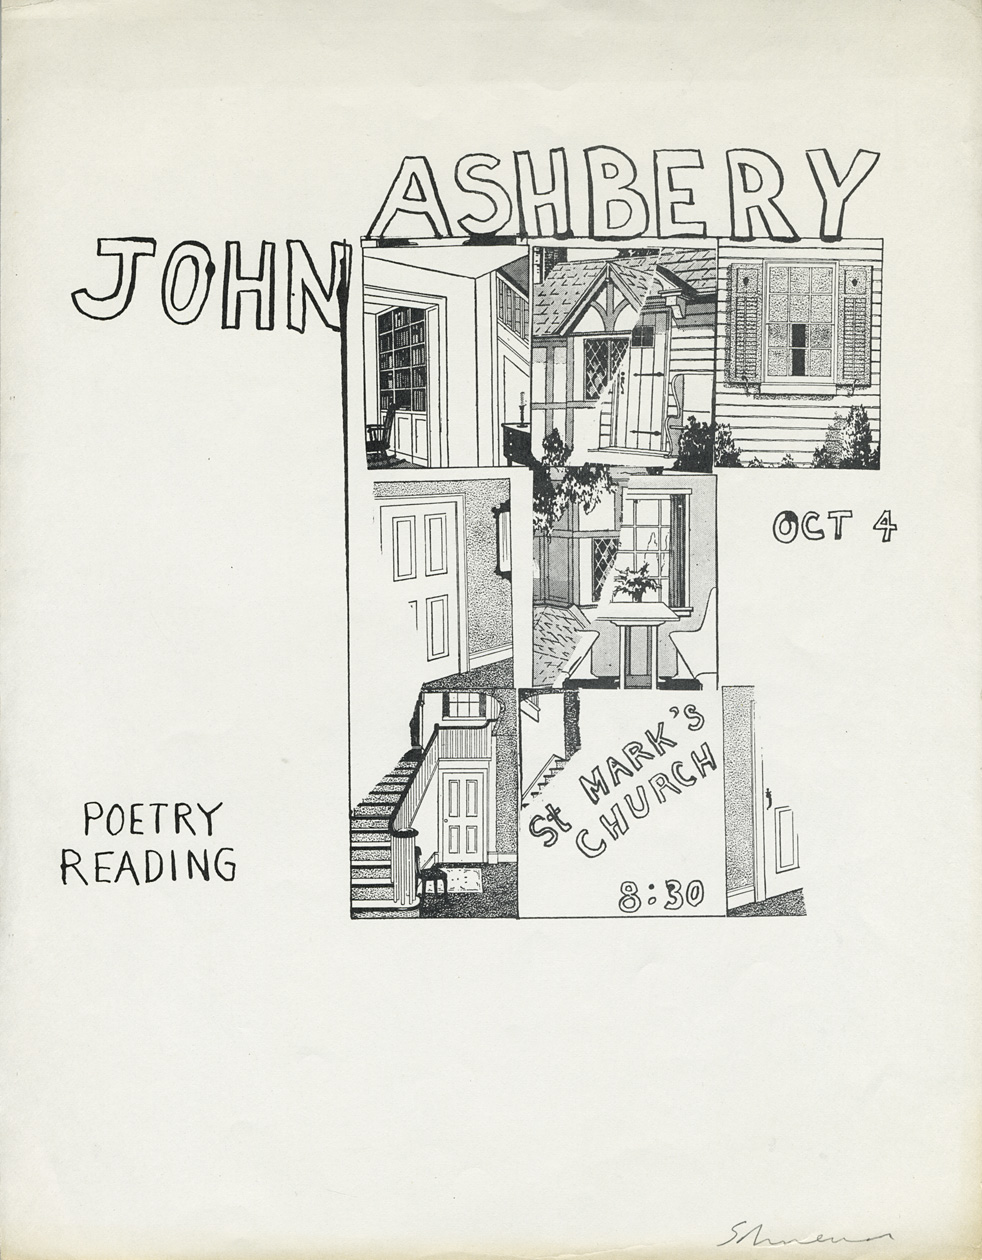 Flyer for a reading by John Ashbery at The Poetry Project at St. Mark’s Church, October 4 [no year]. Artwork by George Schneeman. Signed by Schneeman. 8 1/2 x 11 inches.